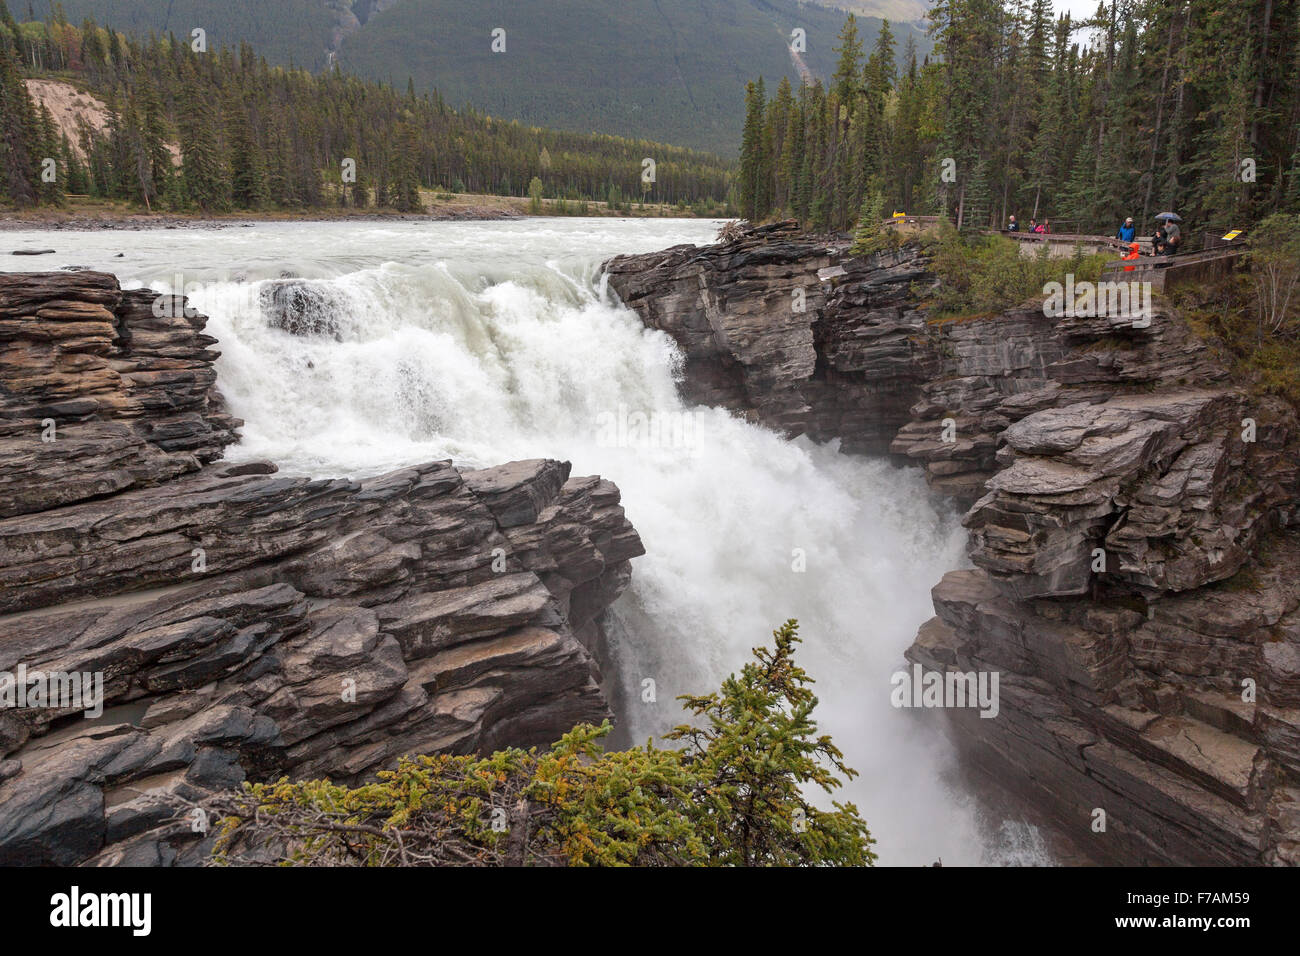 Athabasca Falls, a waterfall in Jasper National Park on the upper Athabasca River Alberta, Canada Stock Photo